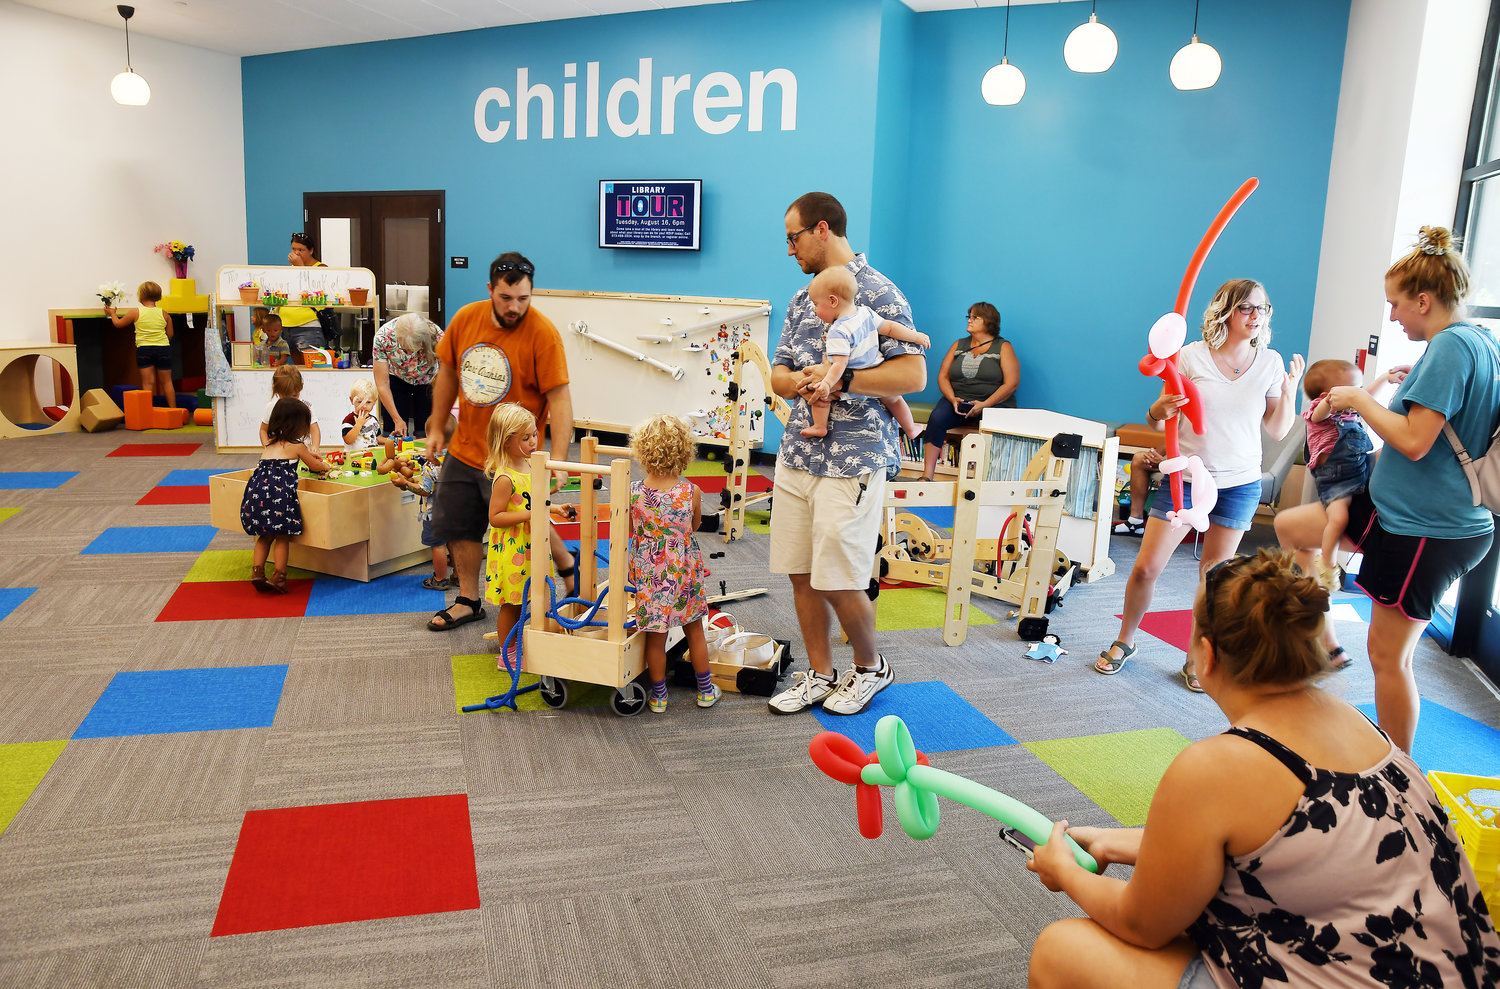 Parents and grandparents on Saturday visit the Scenic Regional Library Children’s section at the new Hermann branch following the dedication ceremony of the facility located in the Bavarian Hills Plaza off of Highway 19 at Route H.